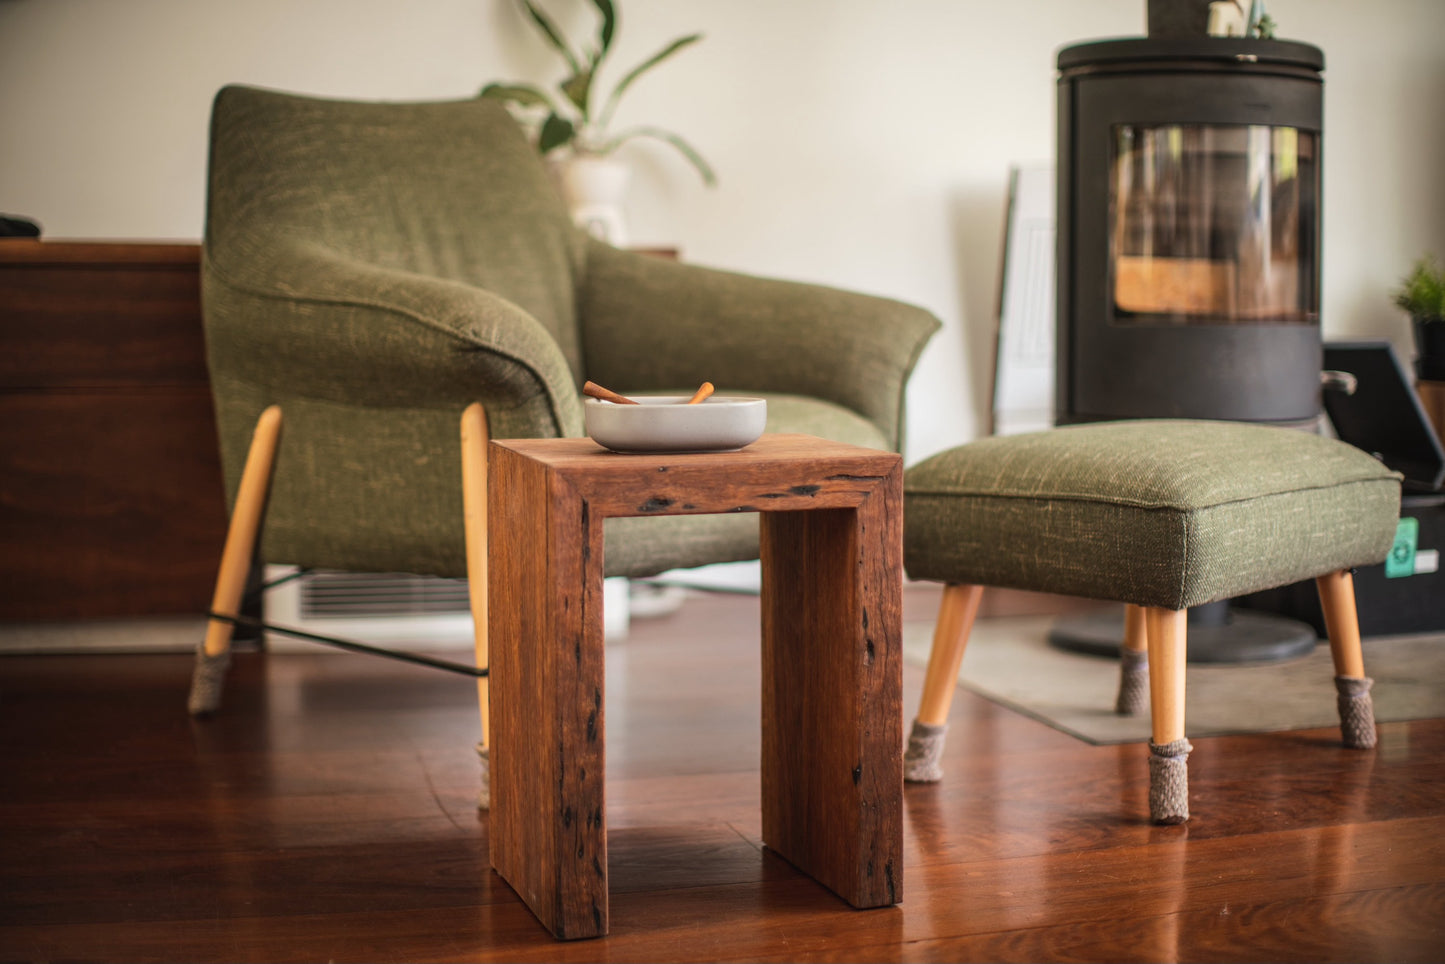 The Glebe Side Table | Reclaimed timber furniture